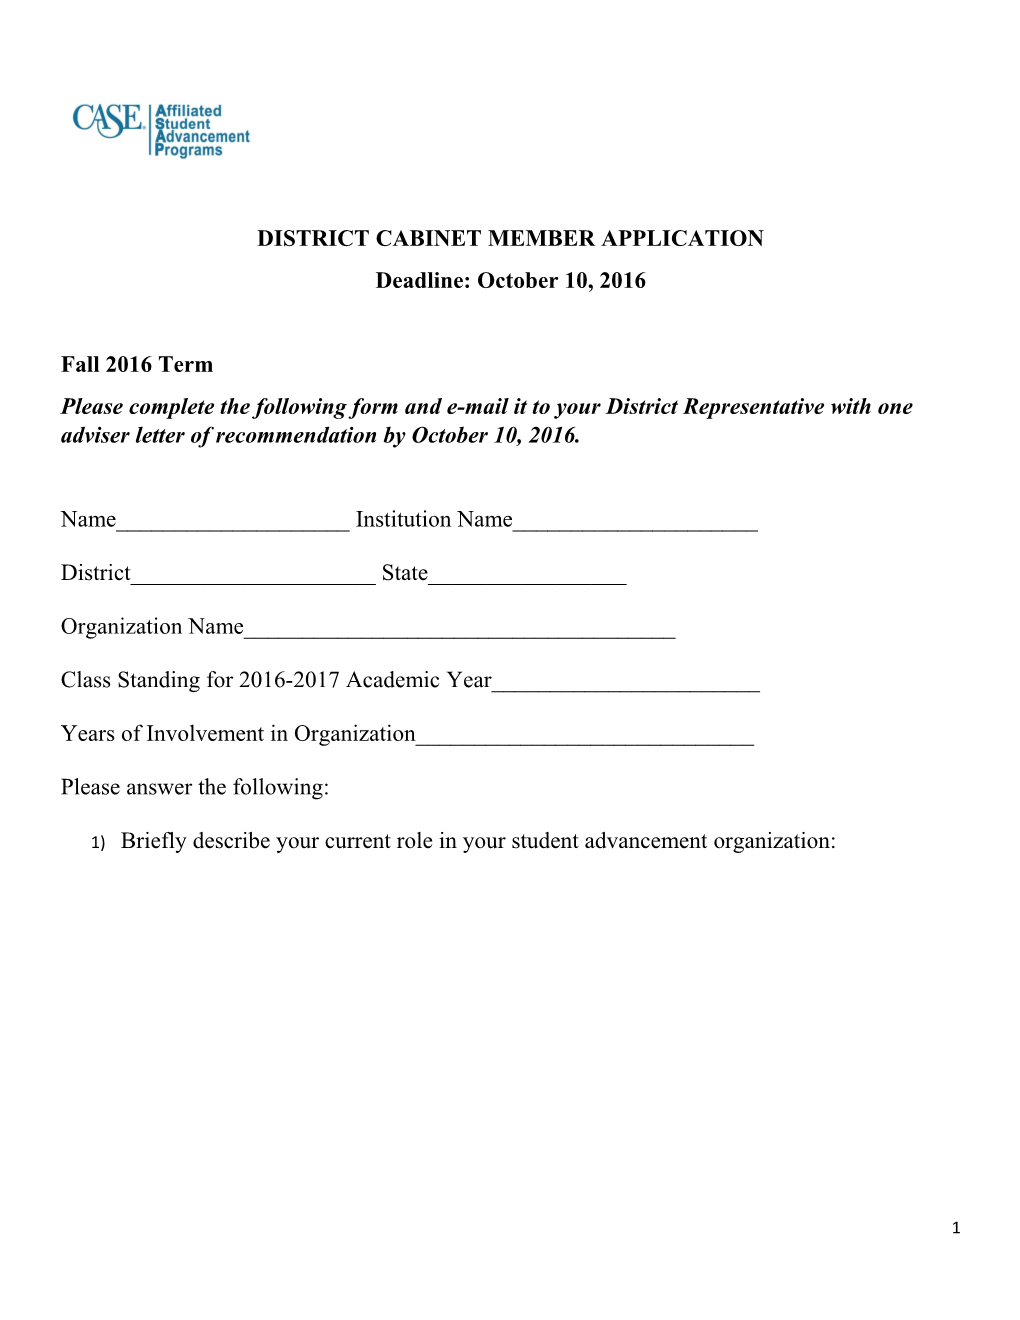 District Cabinet Member Application